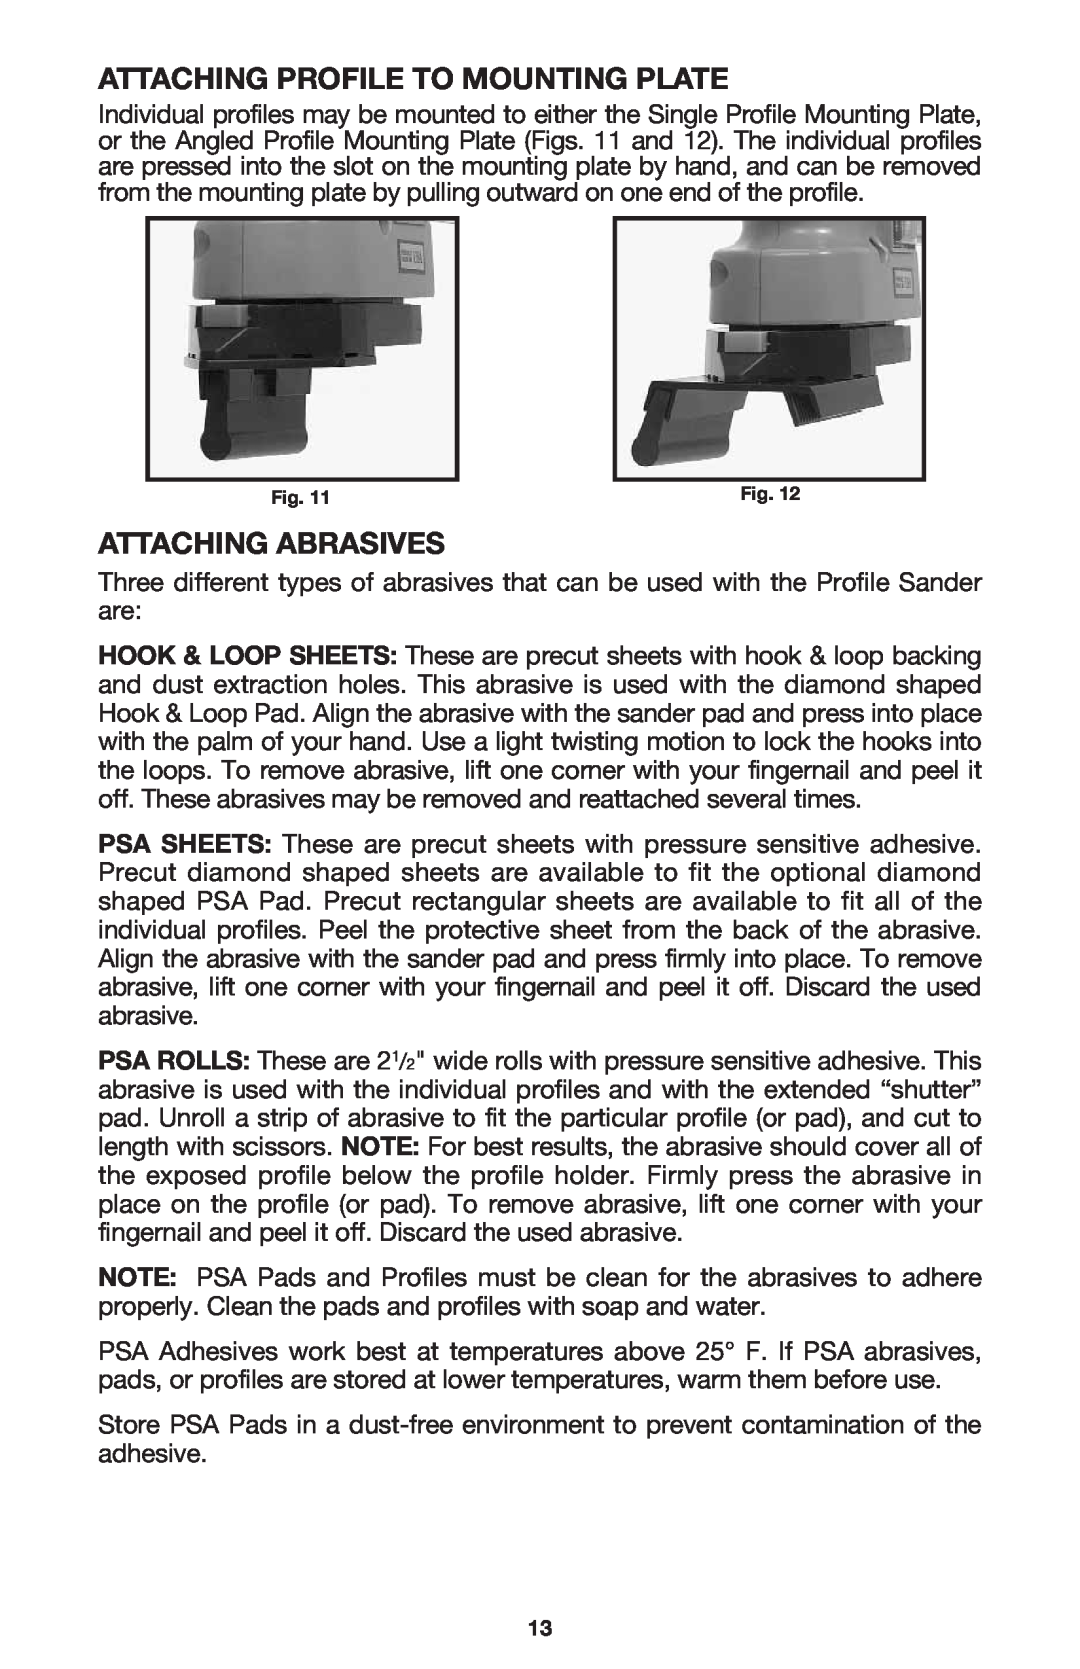 Porter-Cable 444vs instruction manual Attaching Profile To Mounting Plate, Attaching Abrasives 